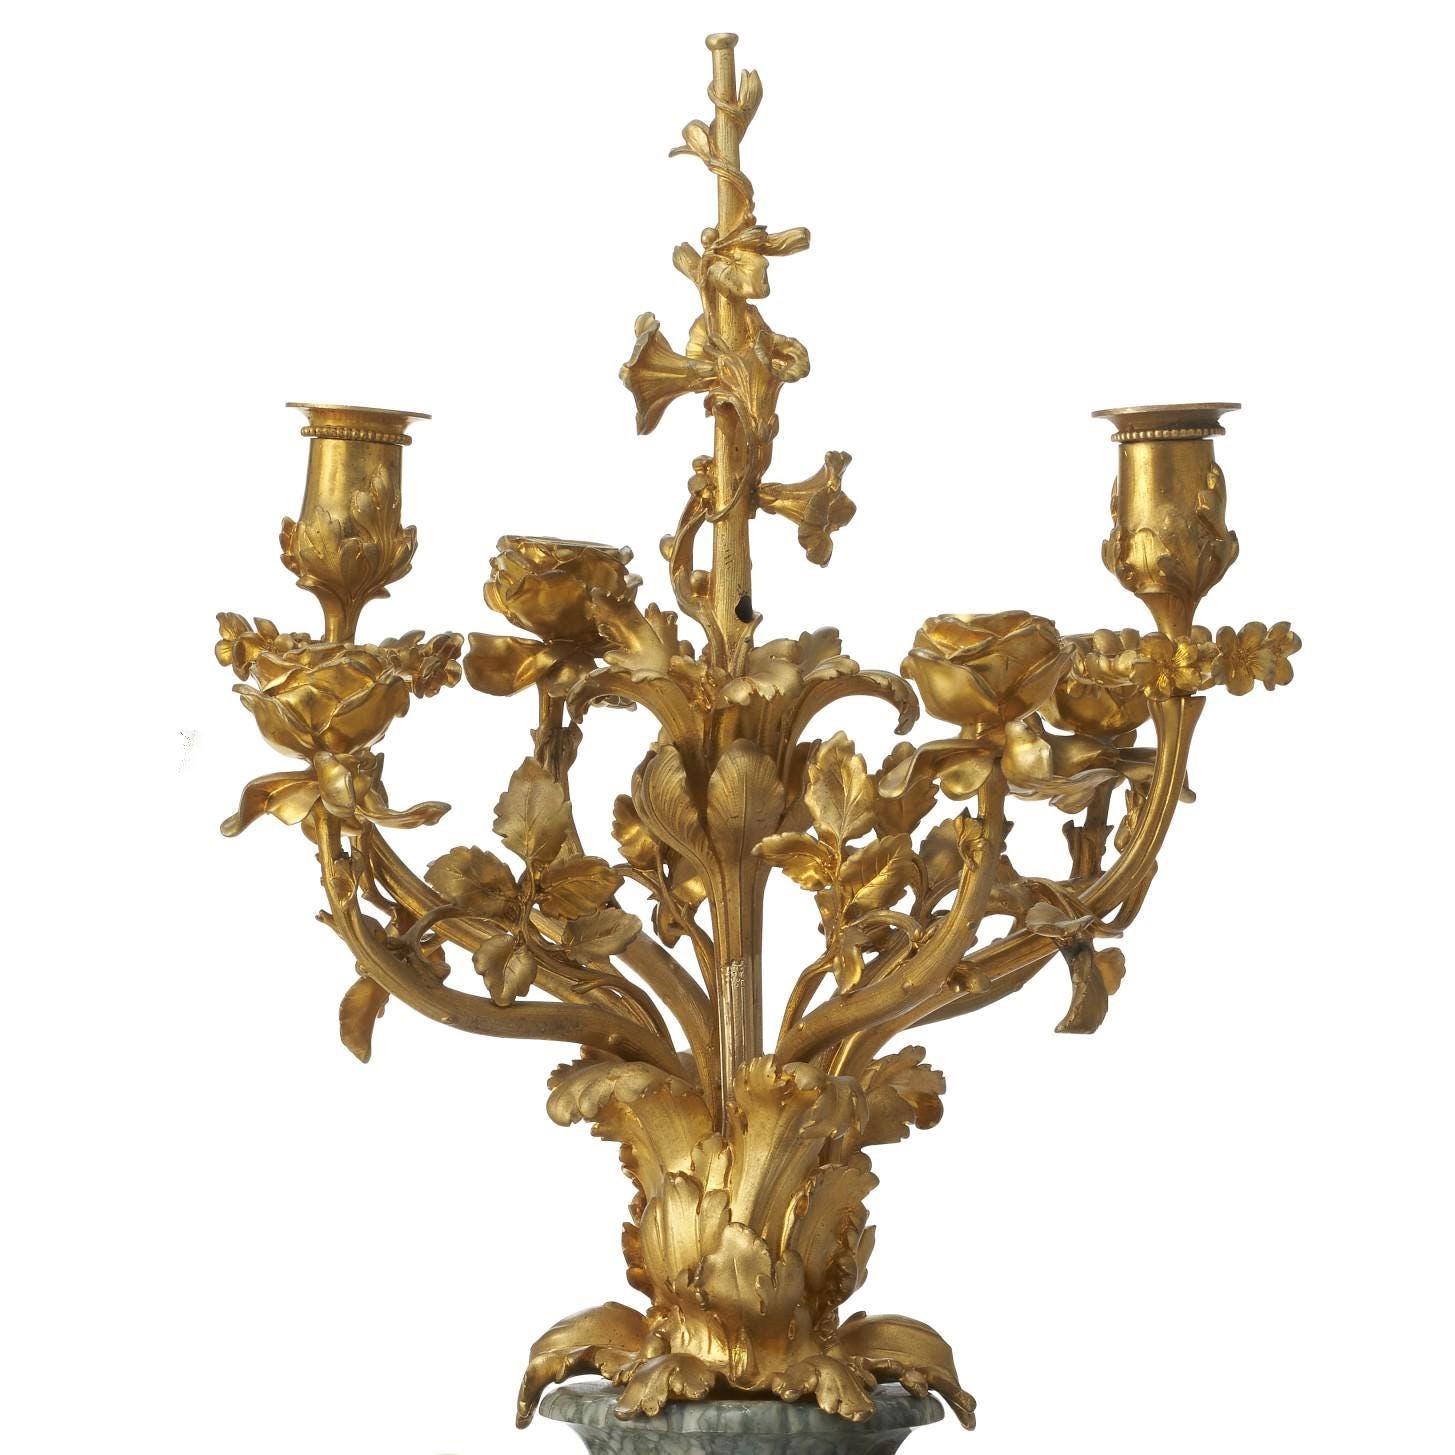 19th Century French Art Nouveau Ormolu Bronze and Green Marble Candelabra by F. Rambaud For Sale